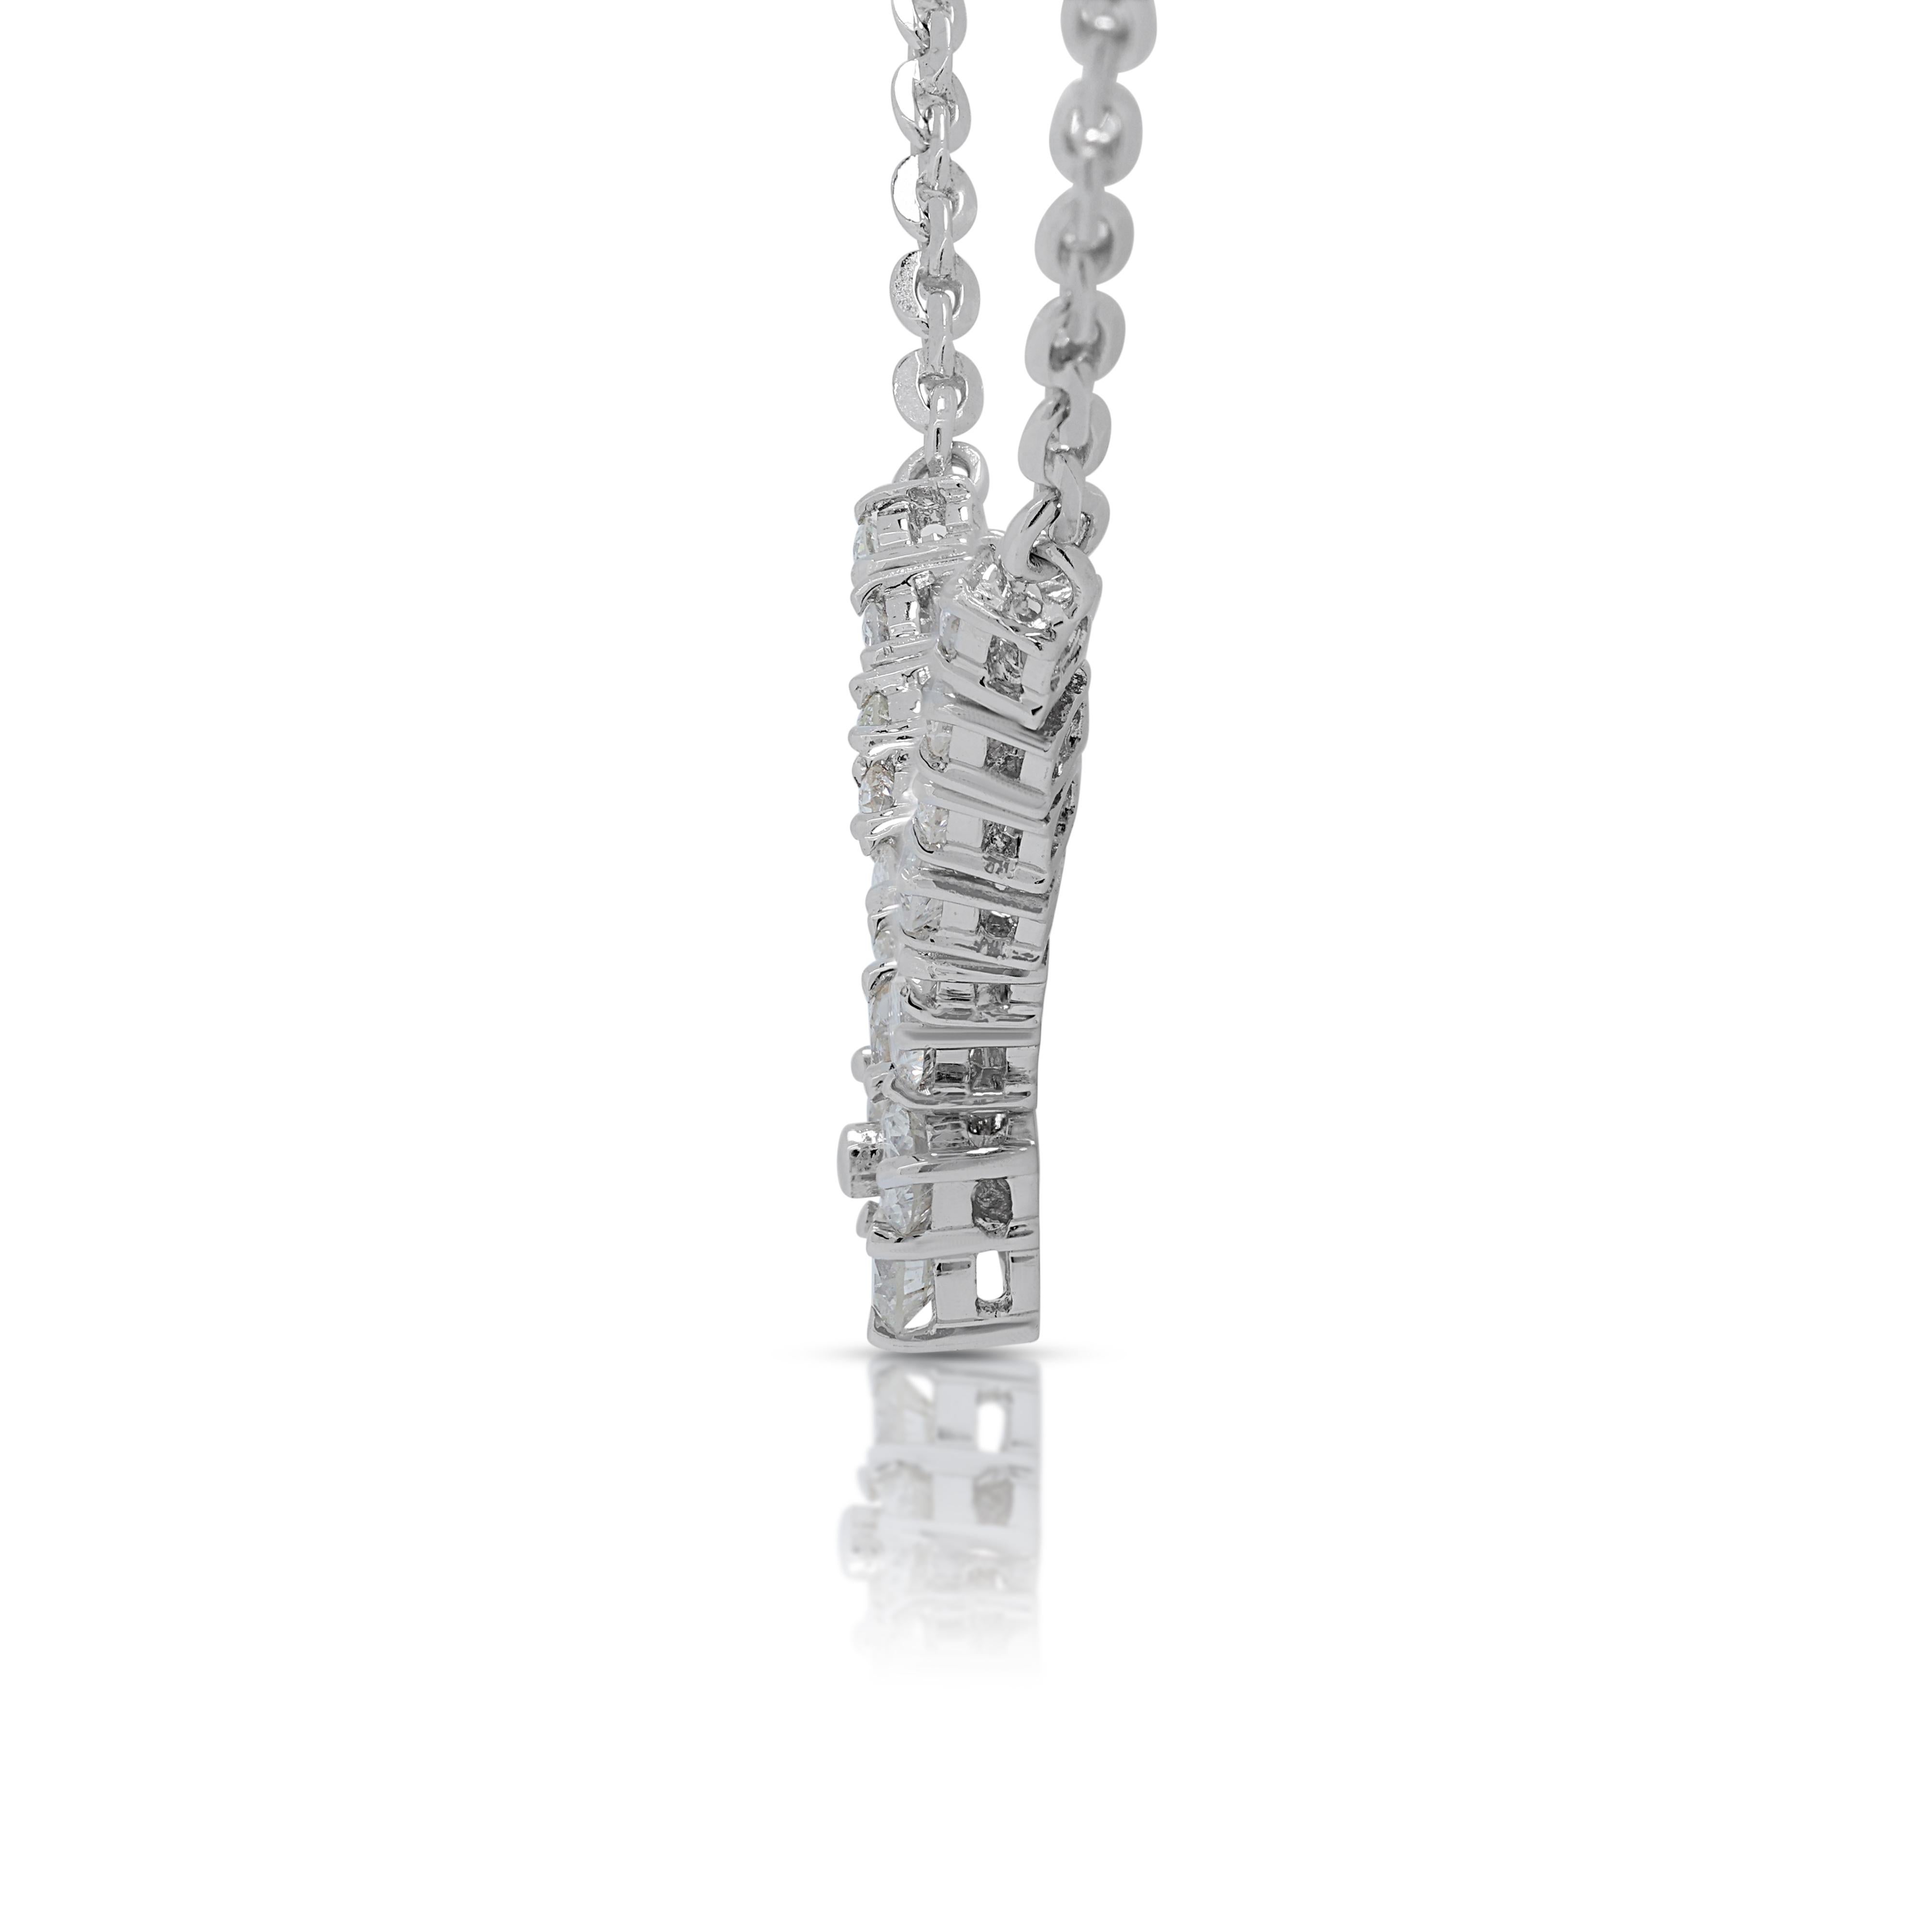 Exquisite 1.0ct Diamonds Necklace in 18K White Gold  For Sale 1